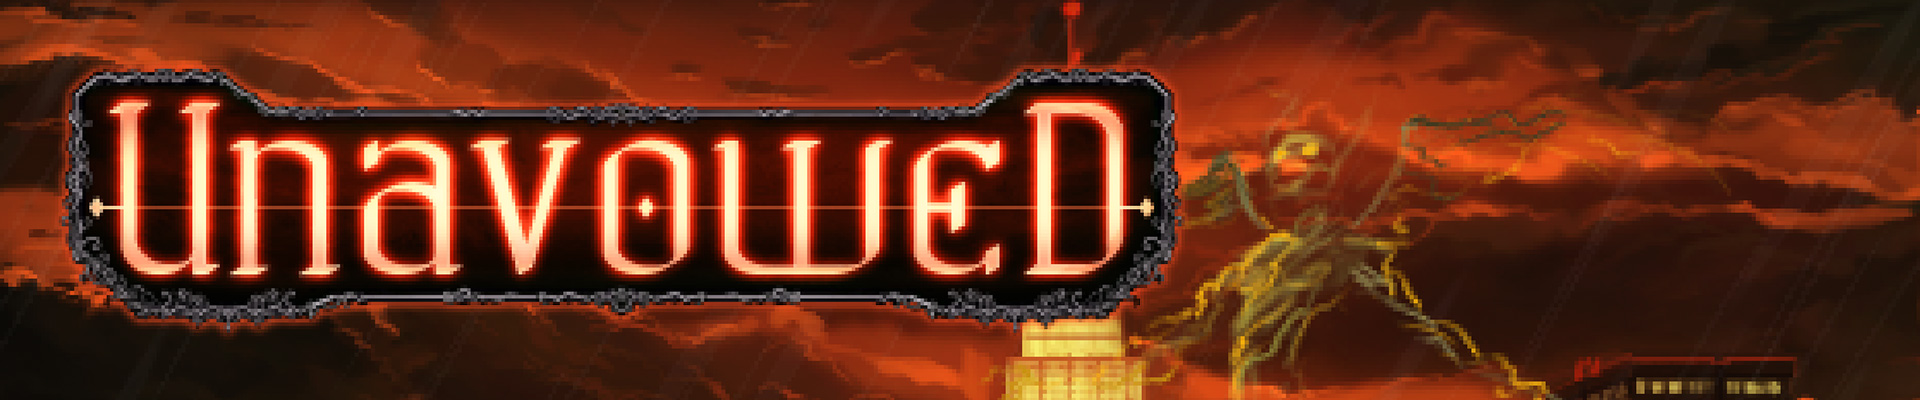 In love with: Unavowed